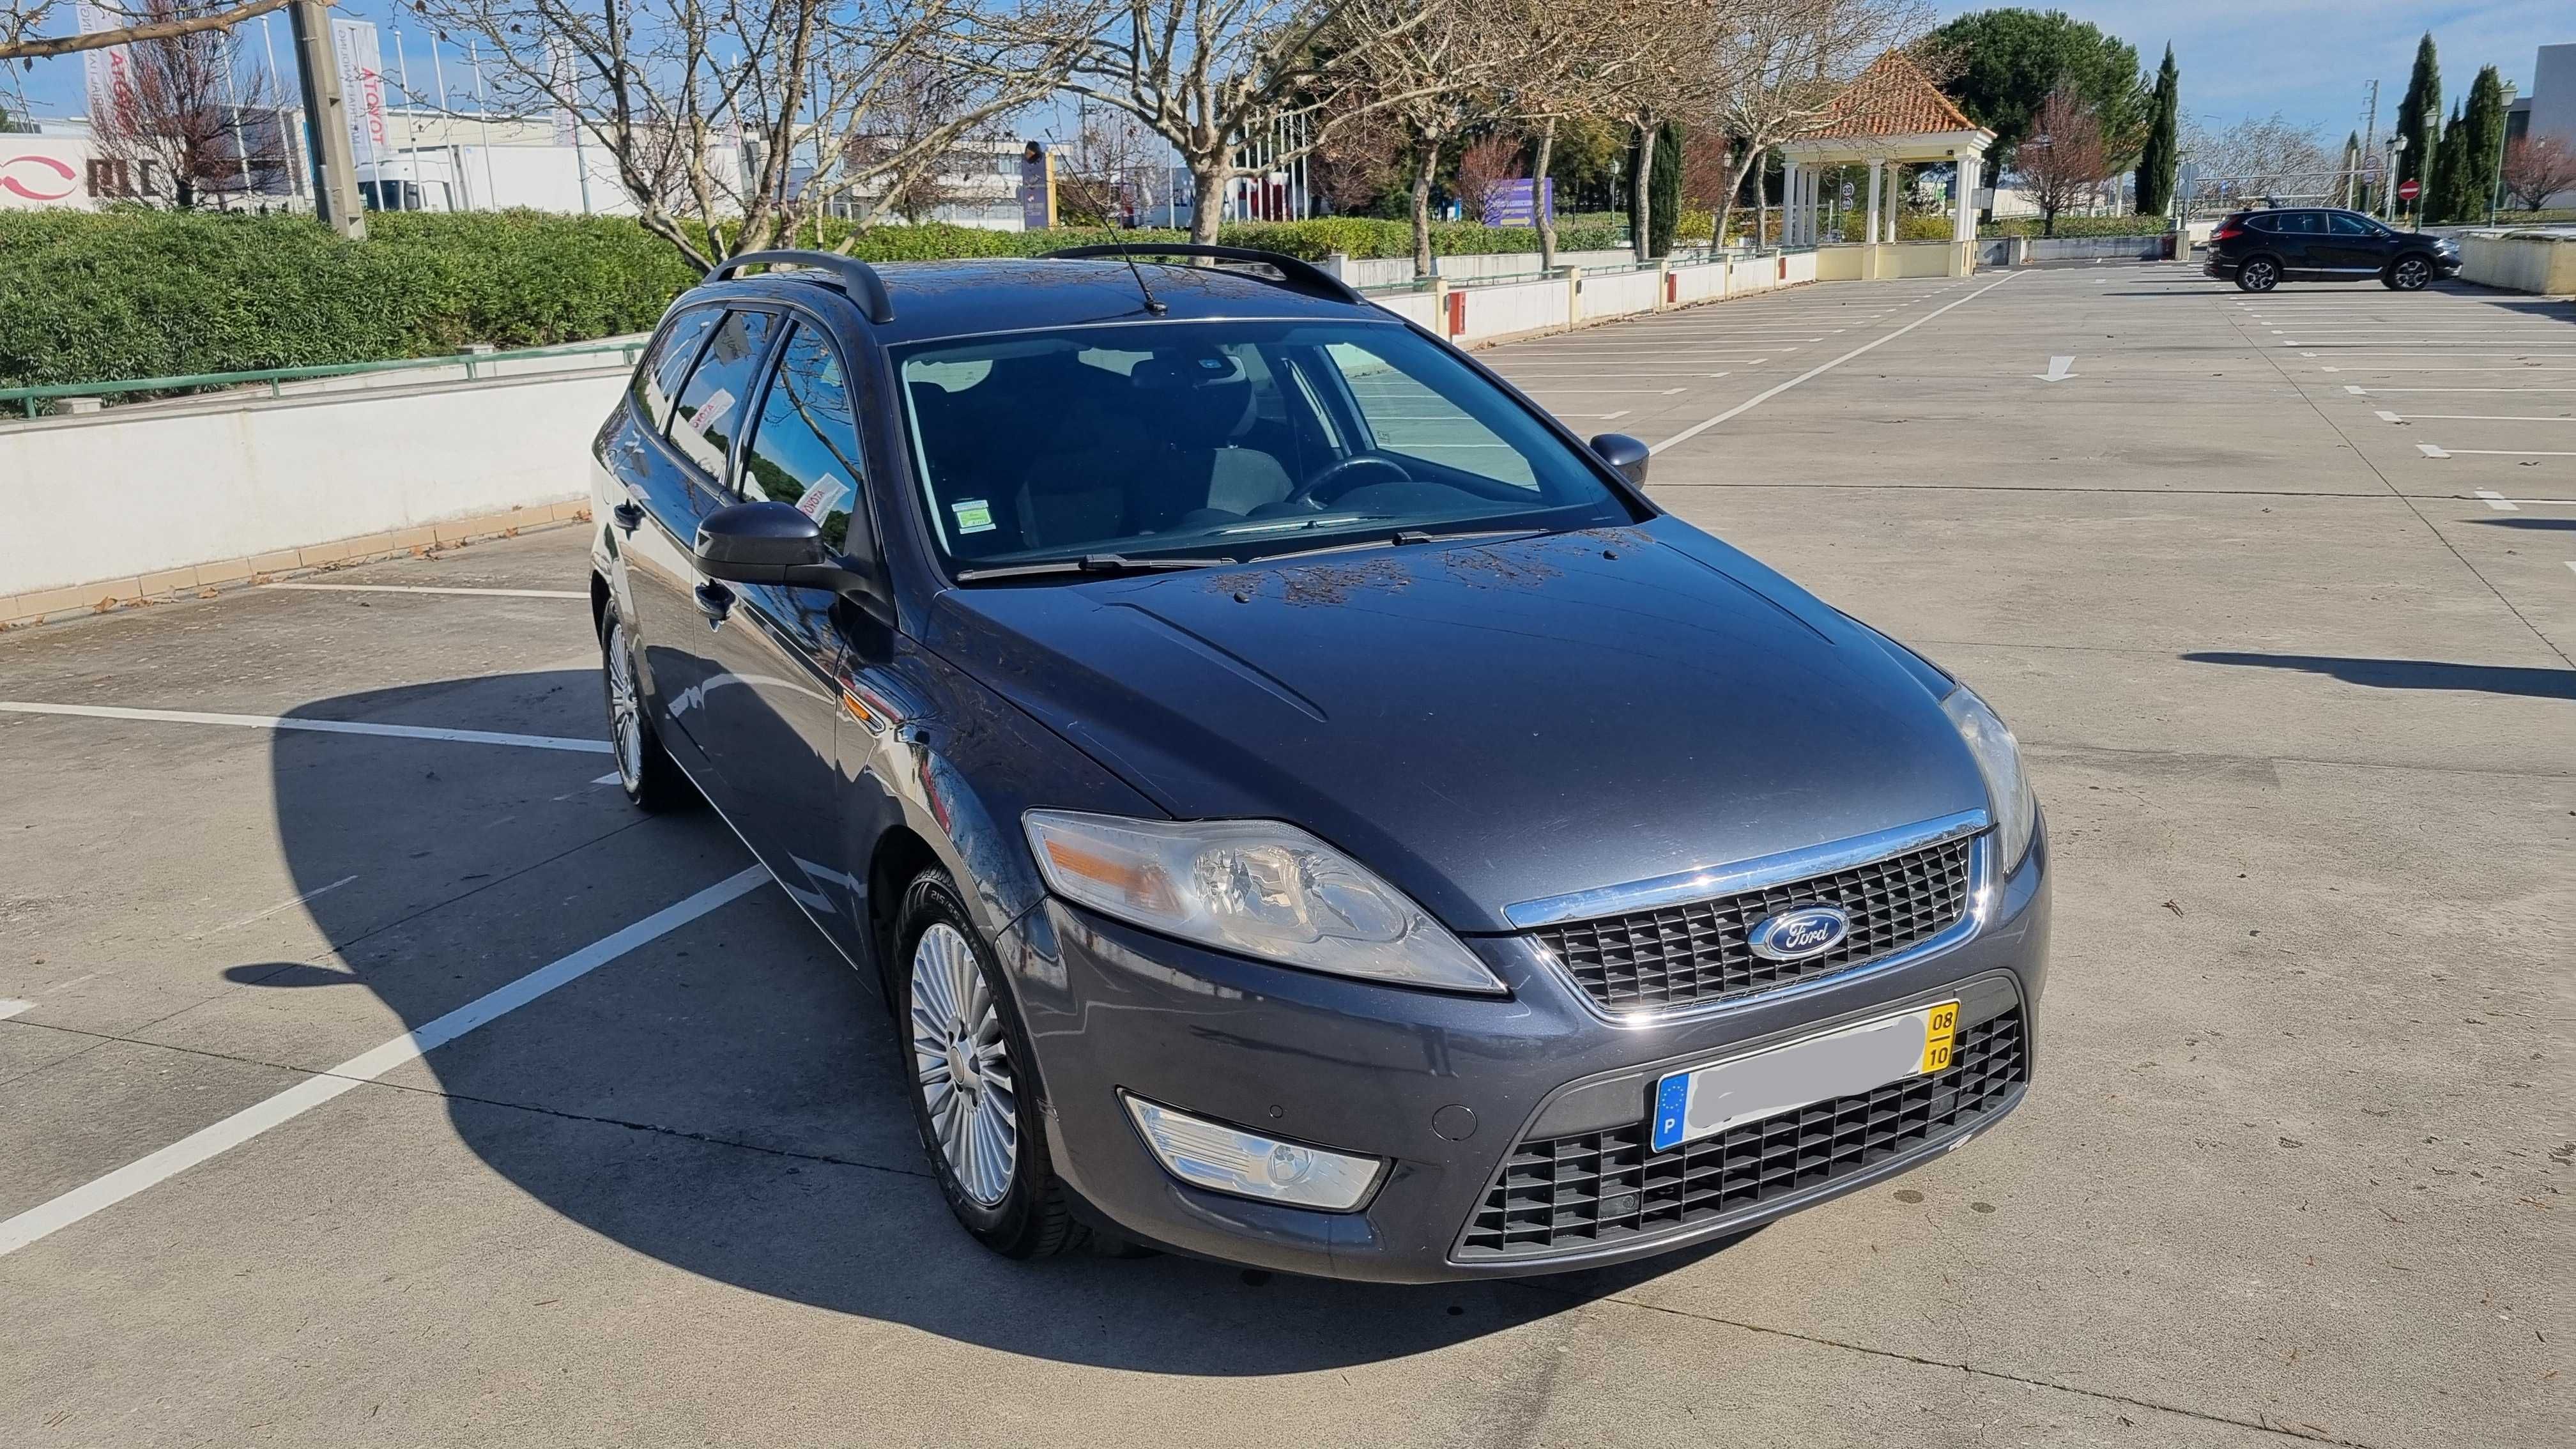 Ford Mondeo SW 1.8 TDCI Econetic